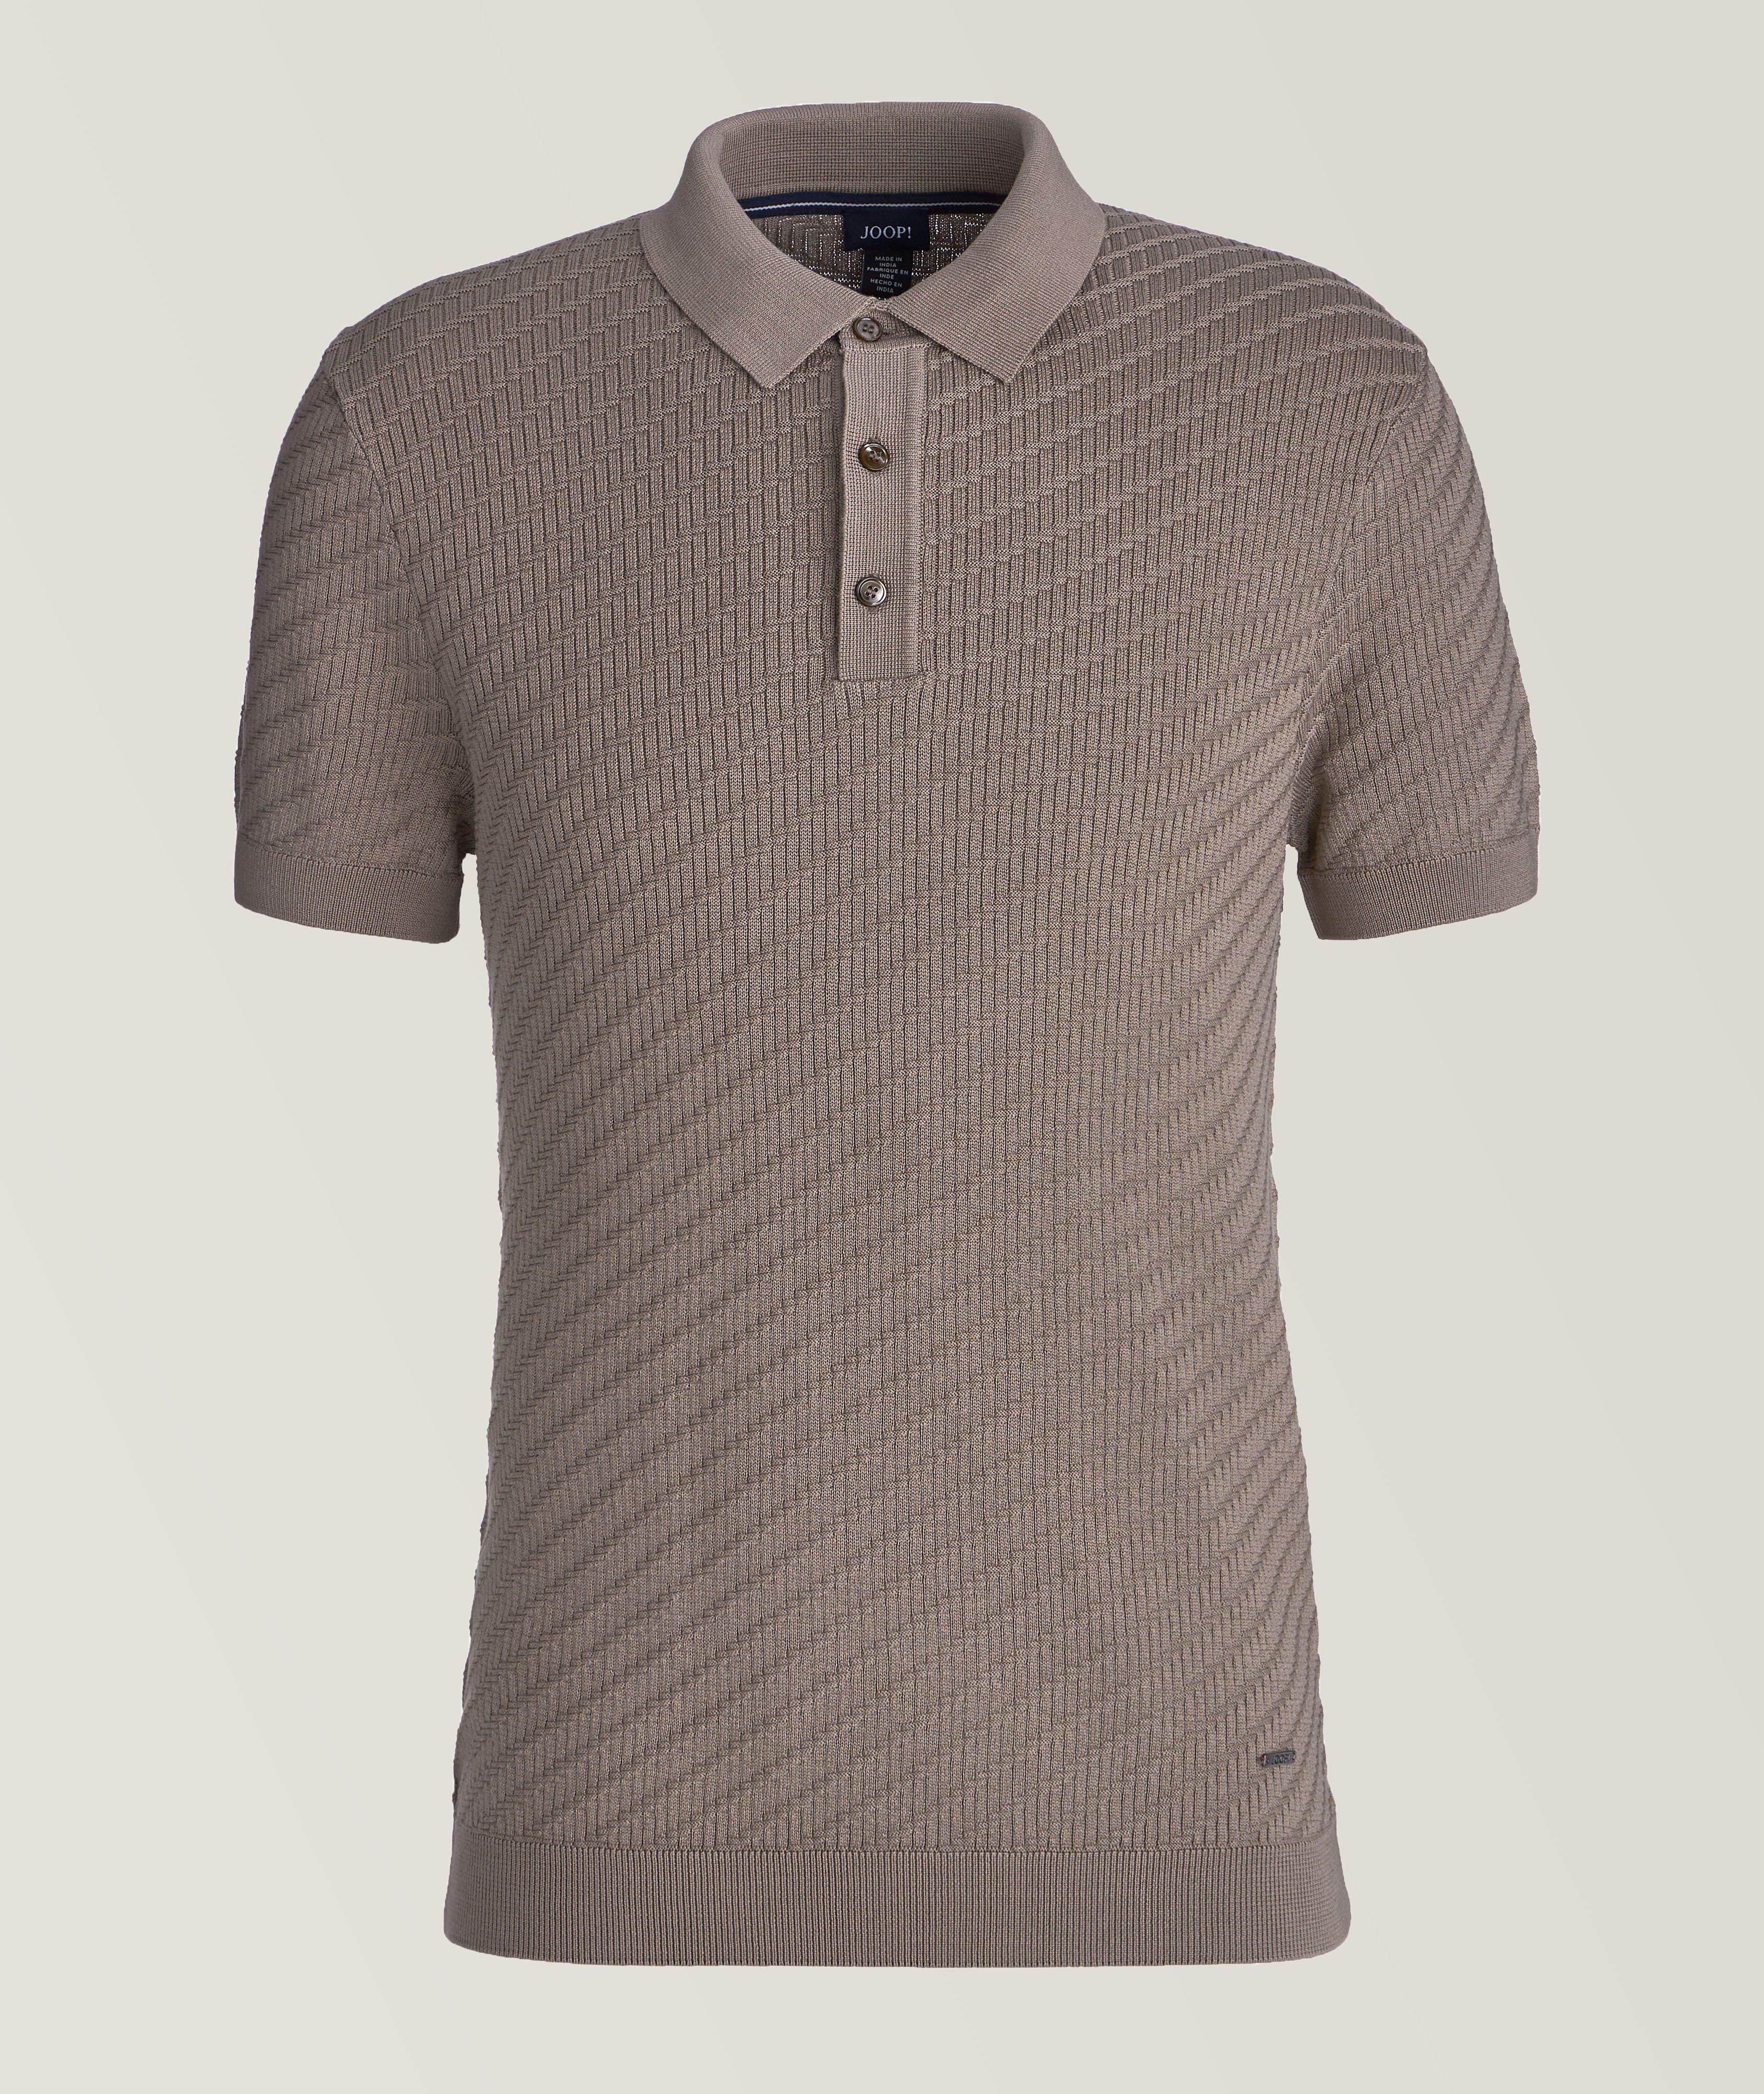 Maurice Textured Cotton Polo image 0